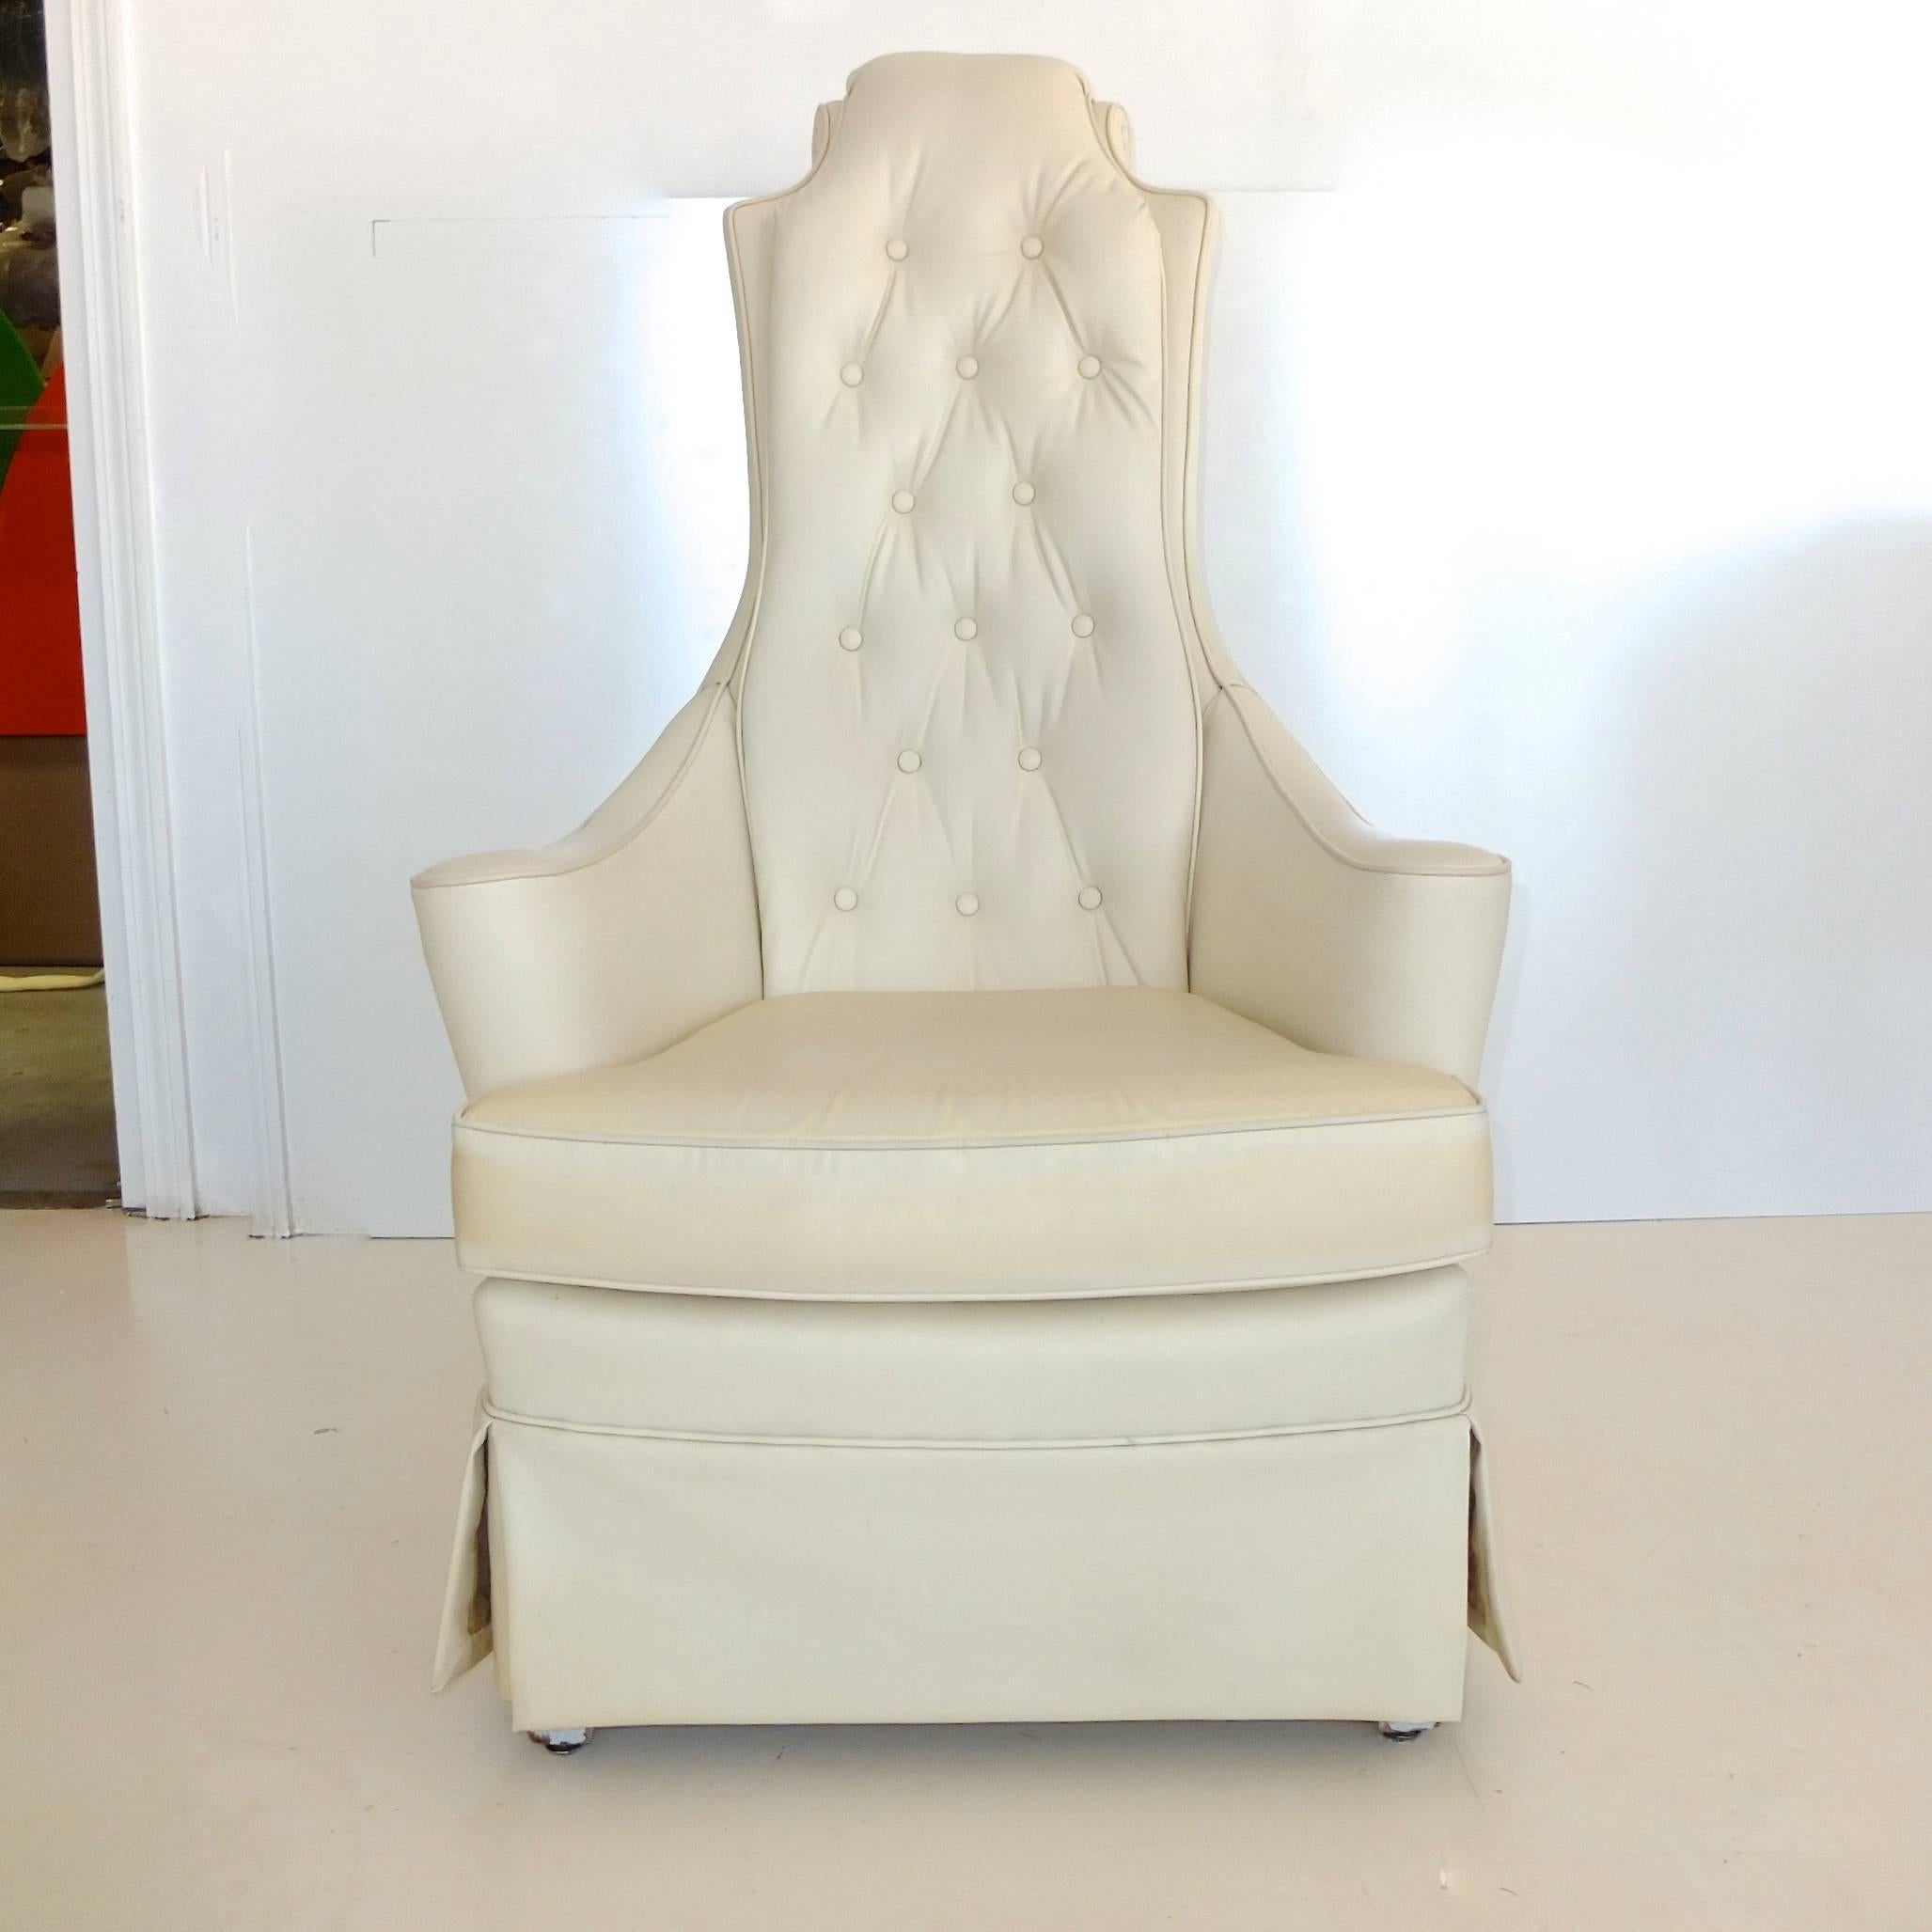 Hip kitsch Hollywood Regency high back armchair upholstered in vanilla bean naughahyde with button tufted back, loose seat cushion and pleated skirt underneath which is four painted wood legs. Lovely scrolling detail on back of headrest and